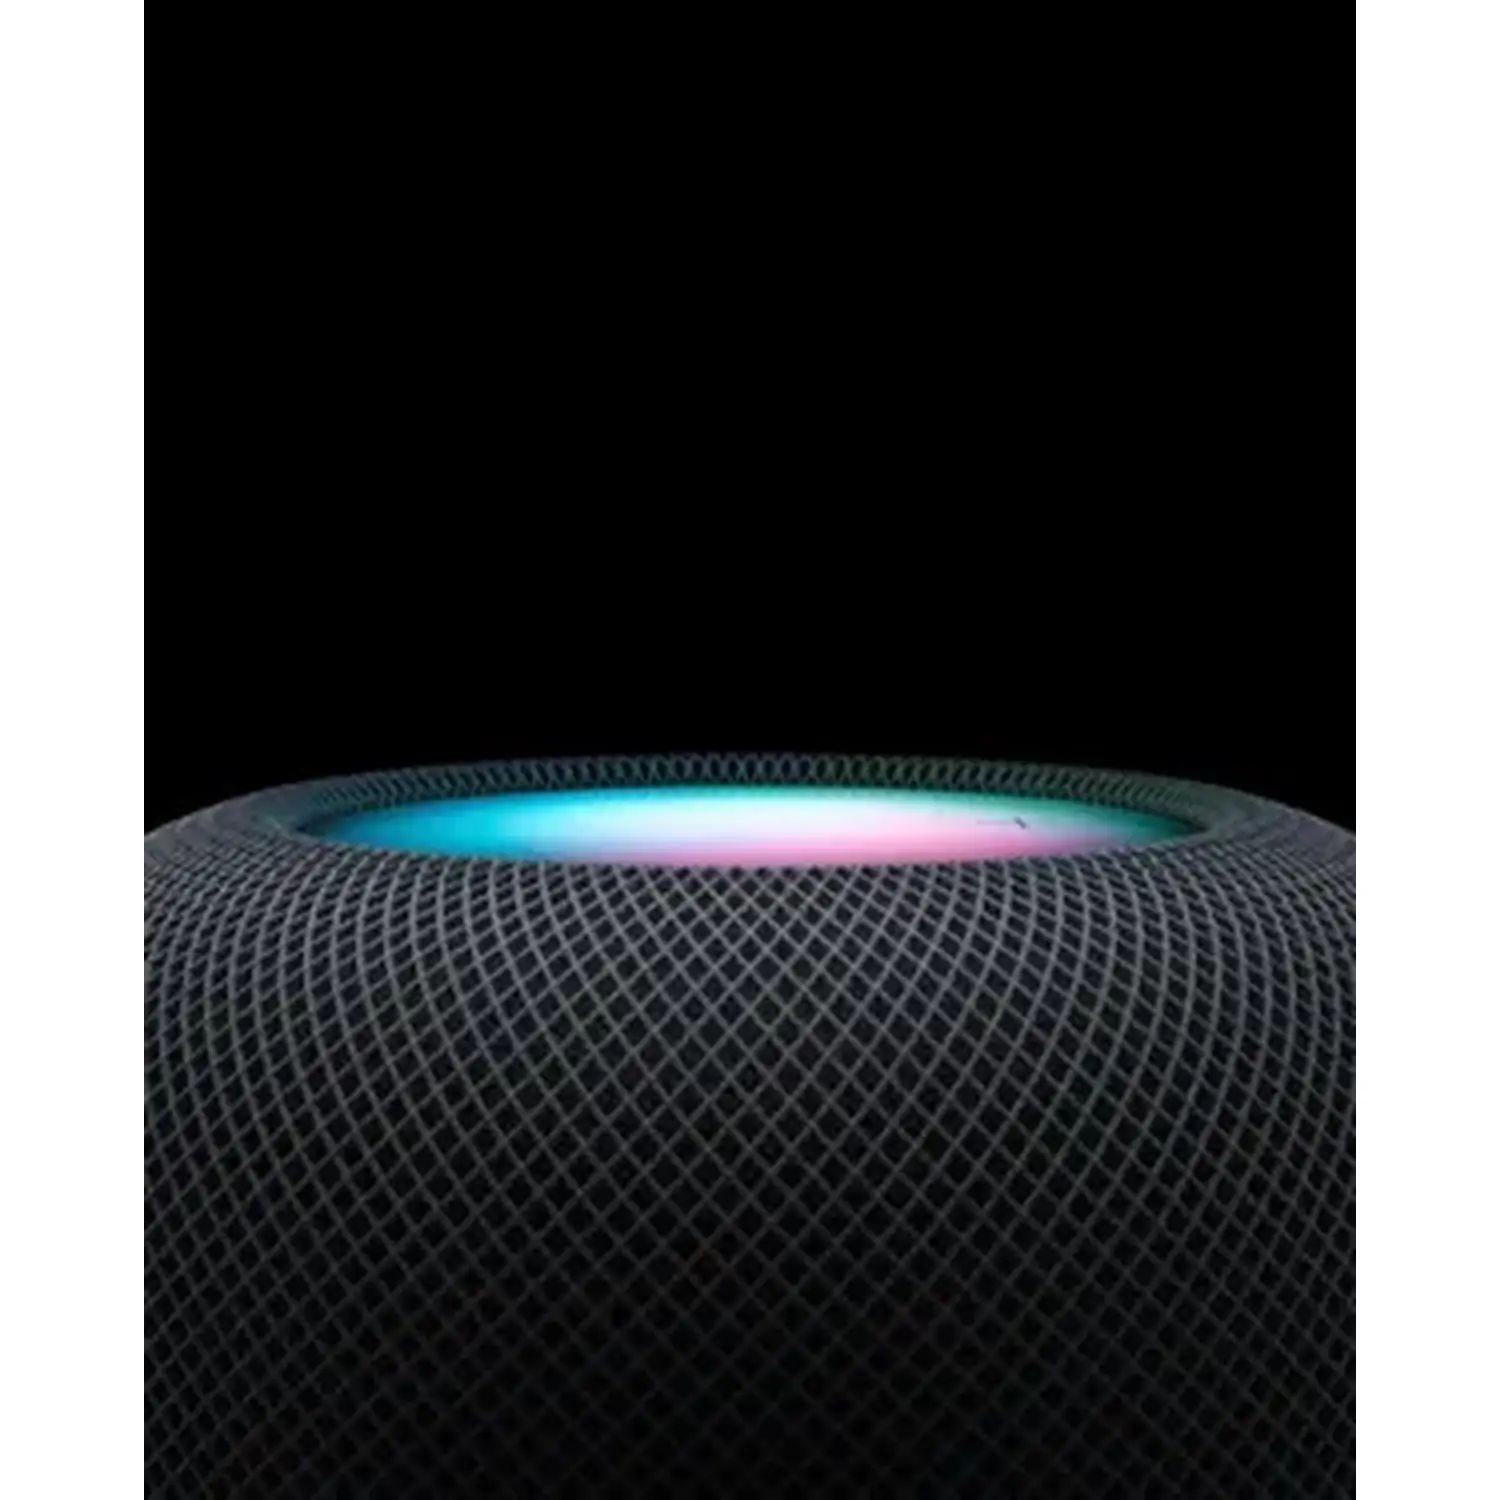 Buy Apple Sweet Music Clear Smart Listening Spot Vocals 2: with Homepod